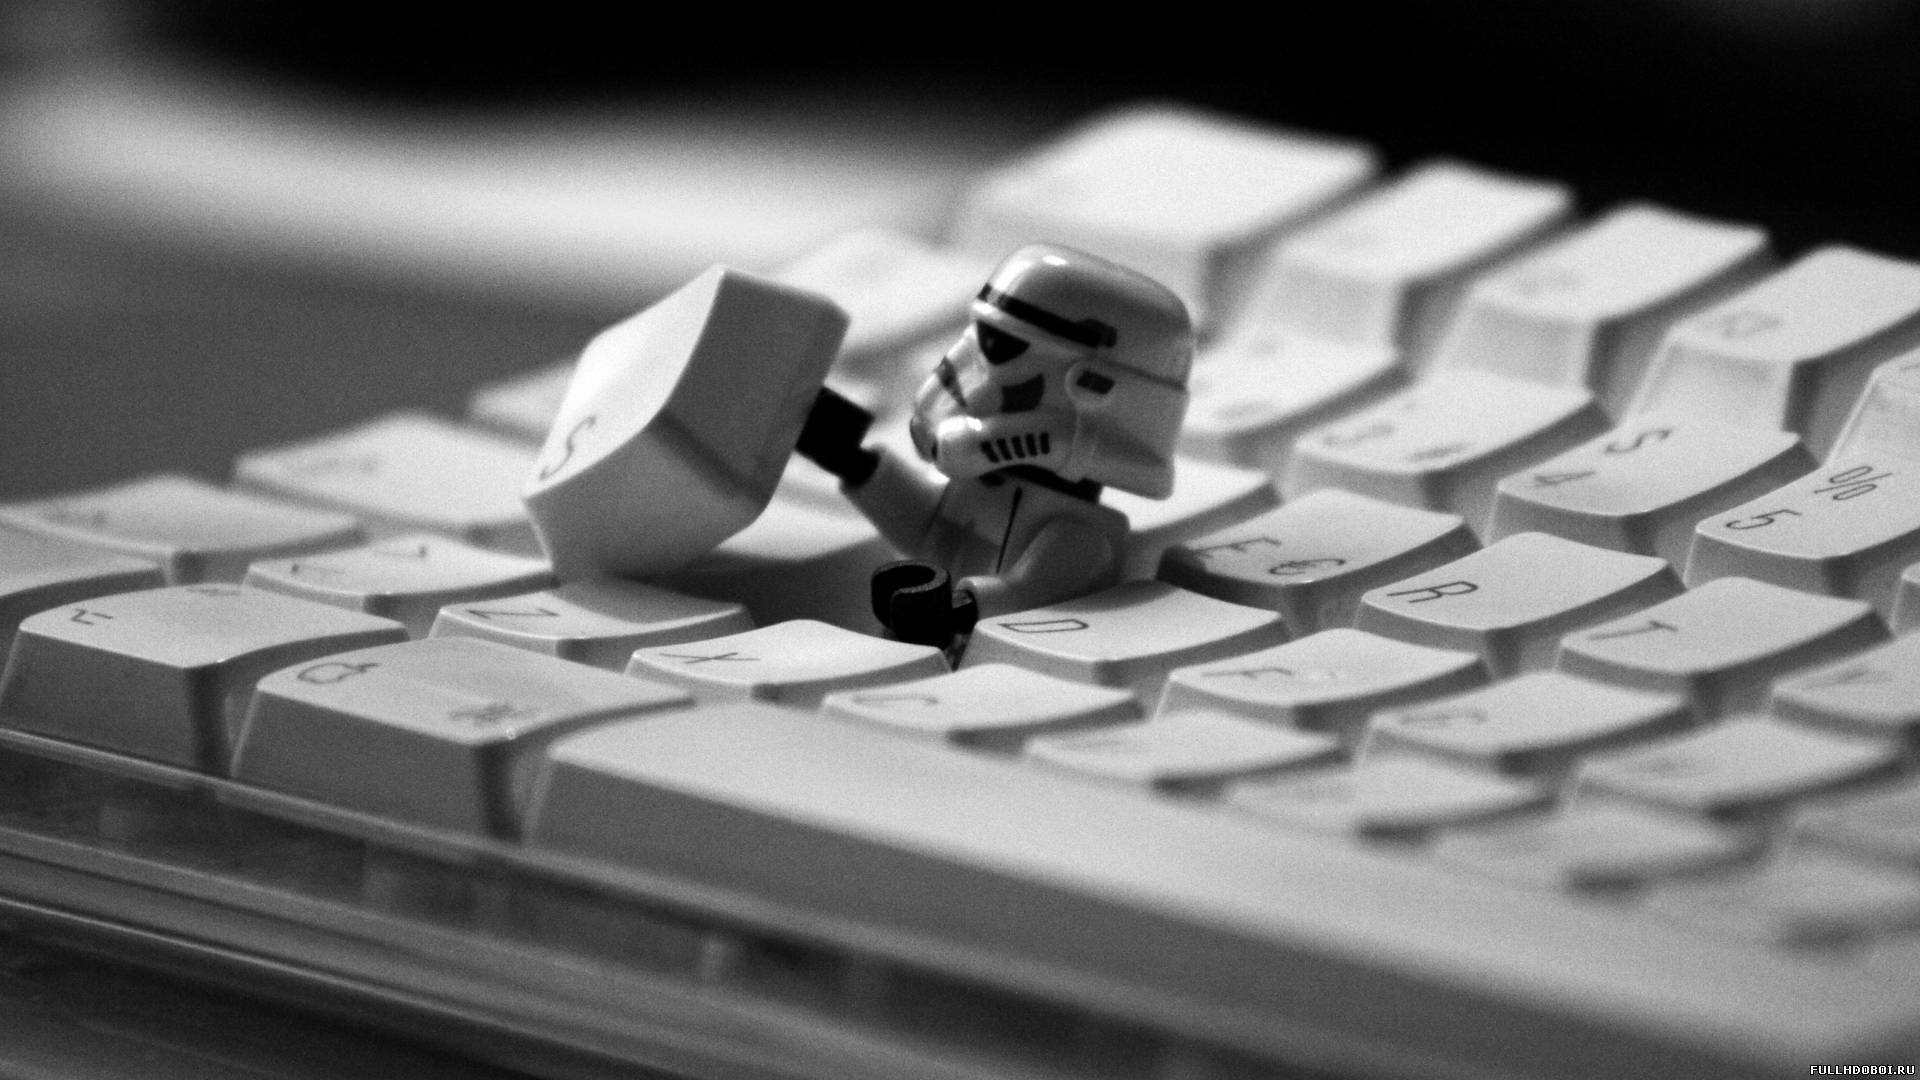 Keyboard under the impact of the Empire